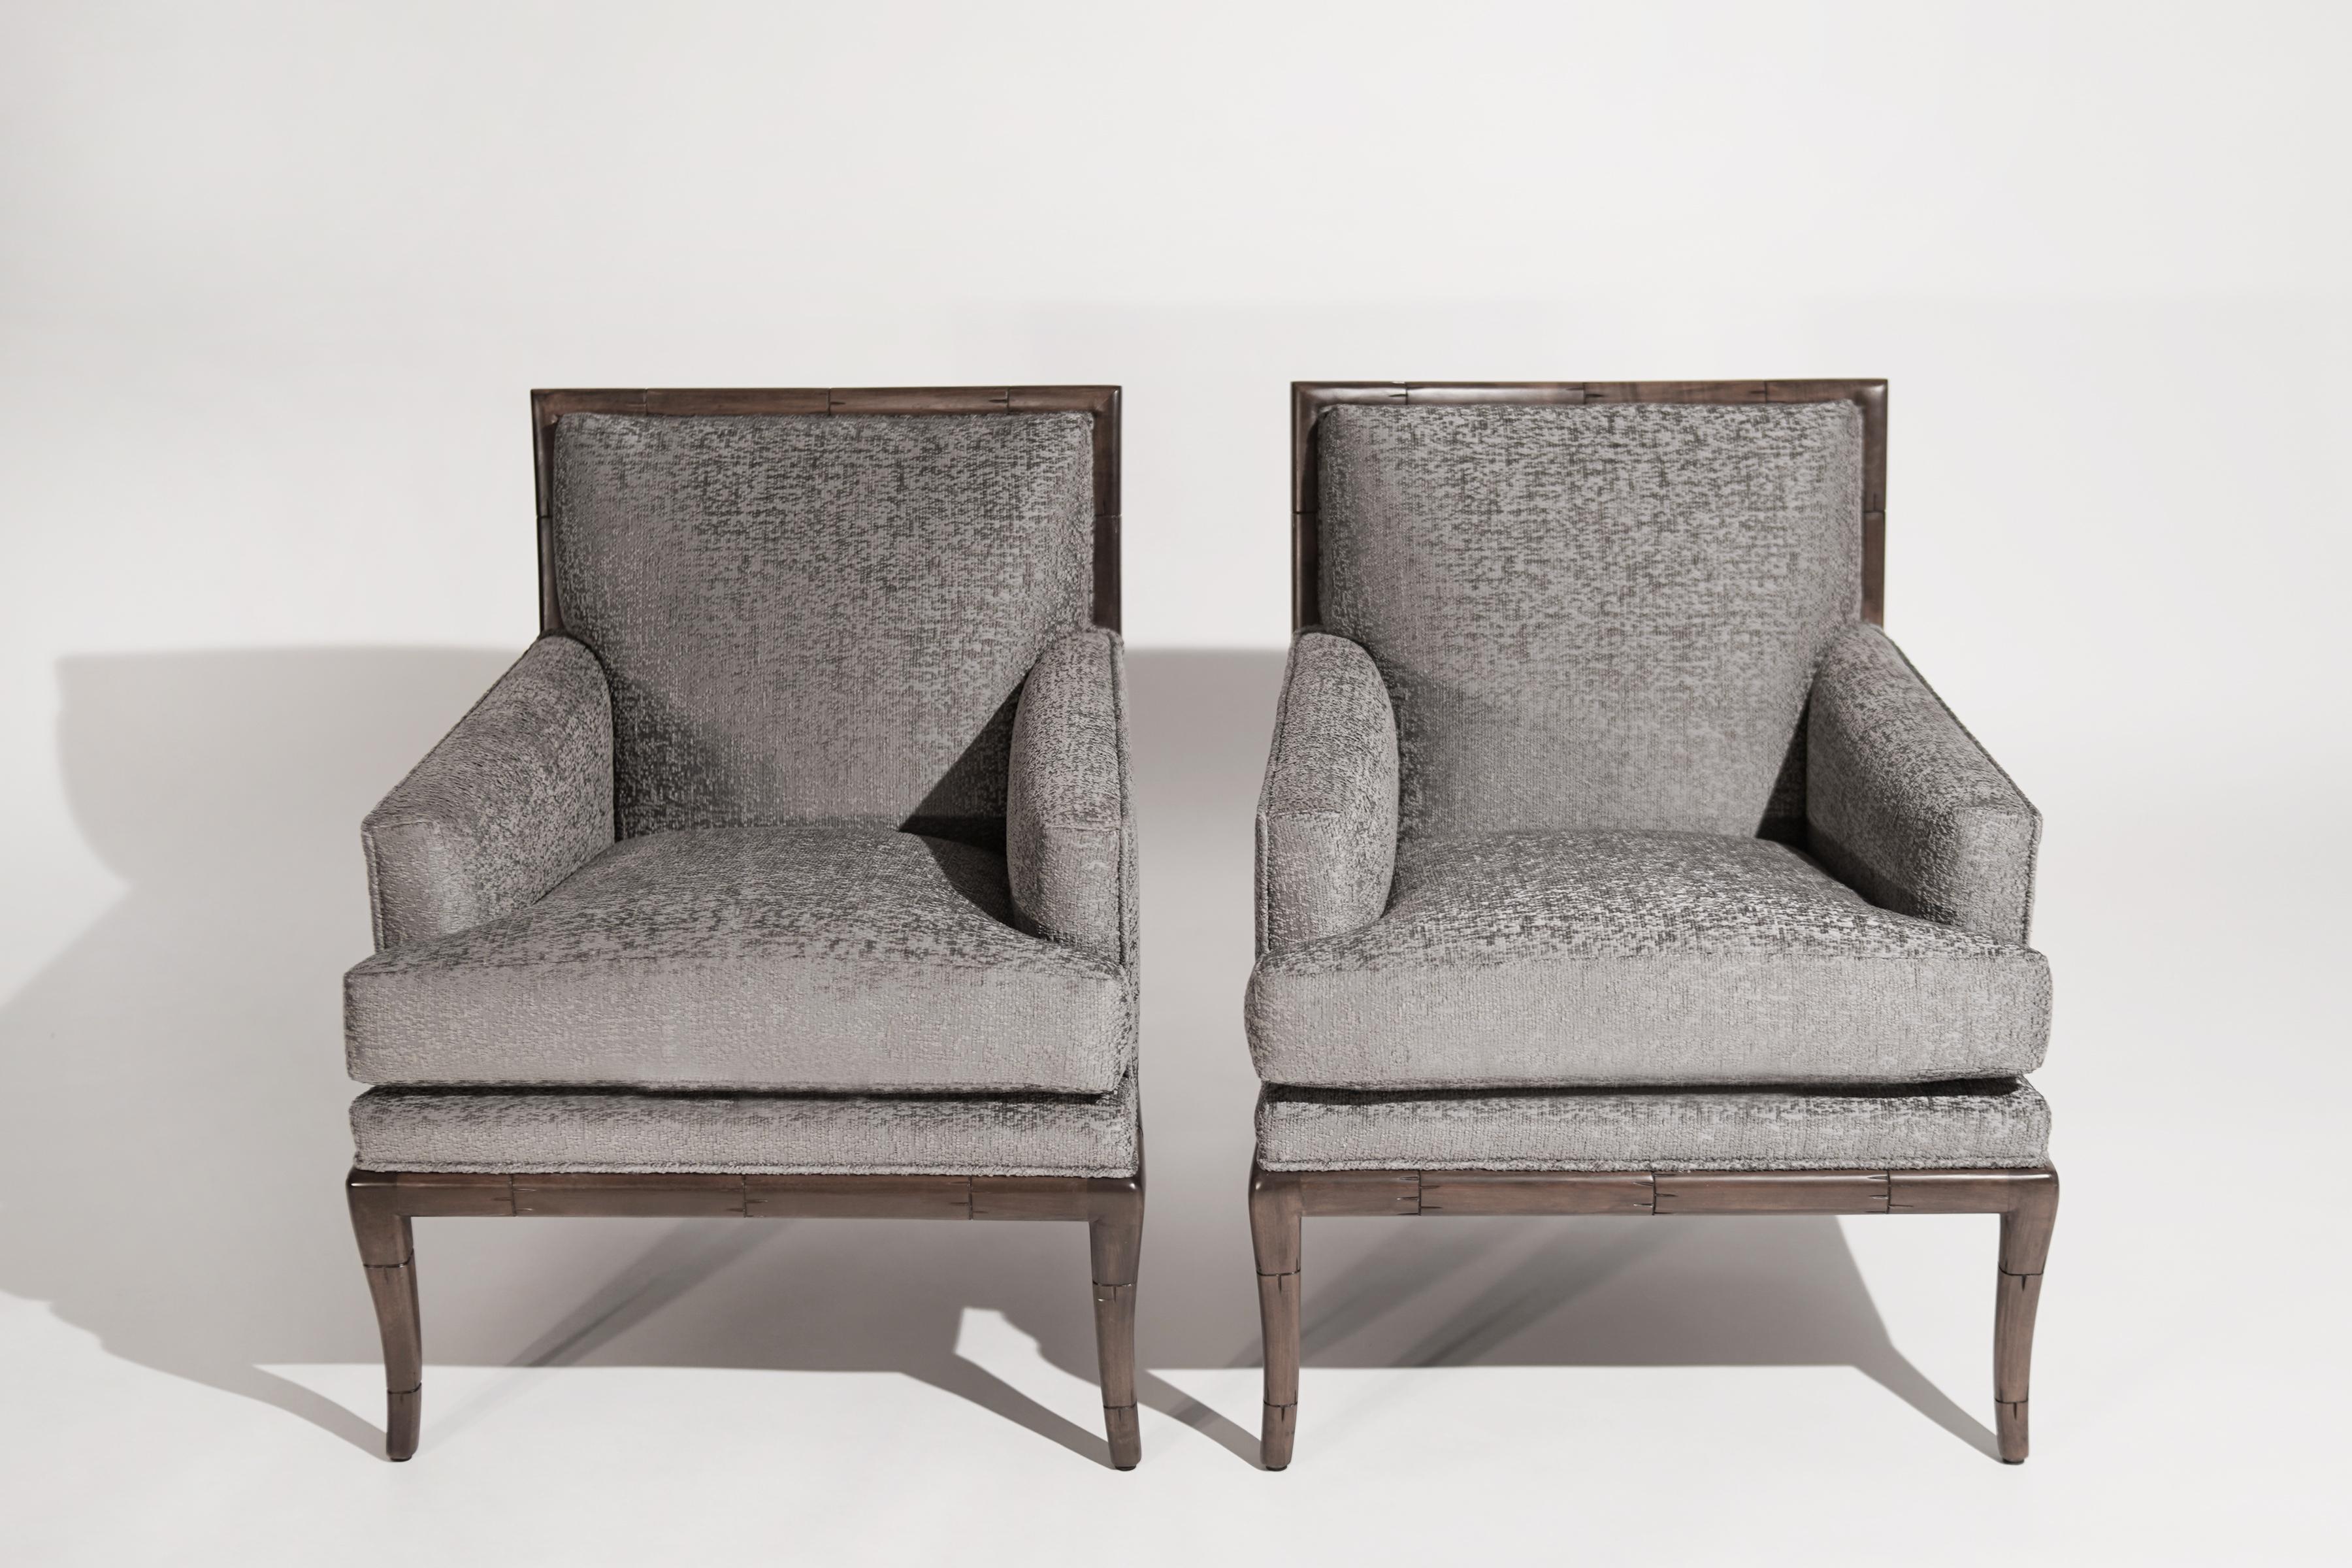 Rare faux bamboo club chairs, designed by T.H. Robsjohn-Gibbings for Widdicomb, circa 1950s. The exposed walnut framework is fully restored, newly upholstered in grey/silver chenille by Holly Hunt.

Other designers of the period include Vladimir